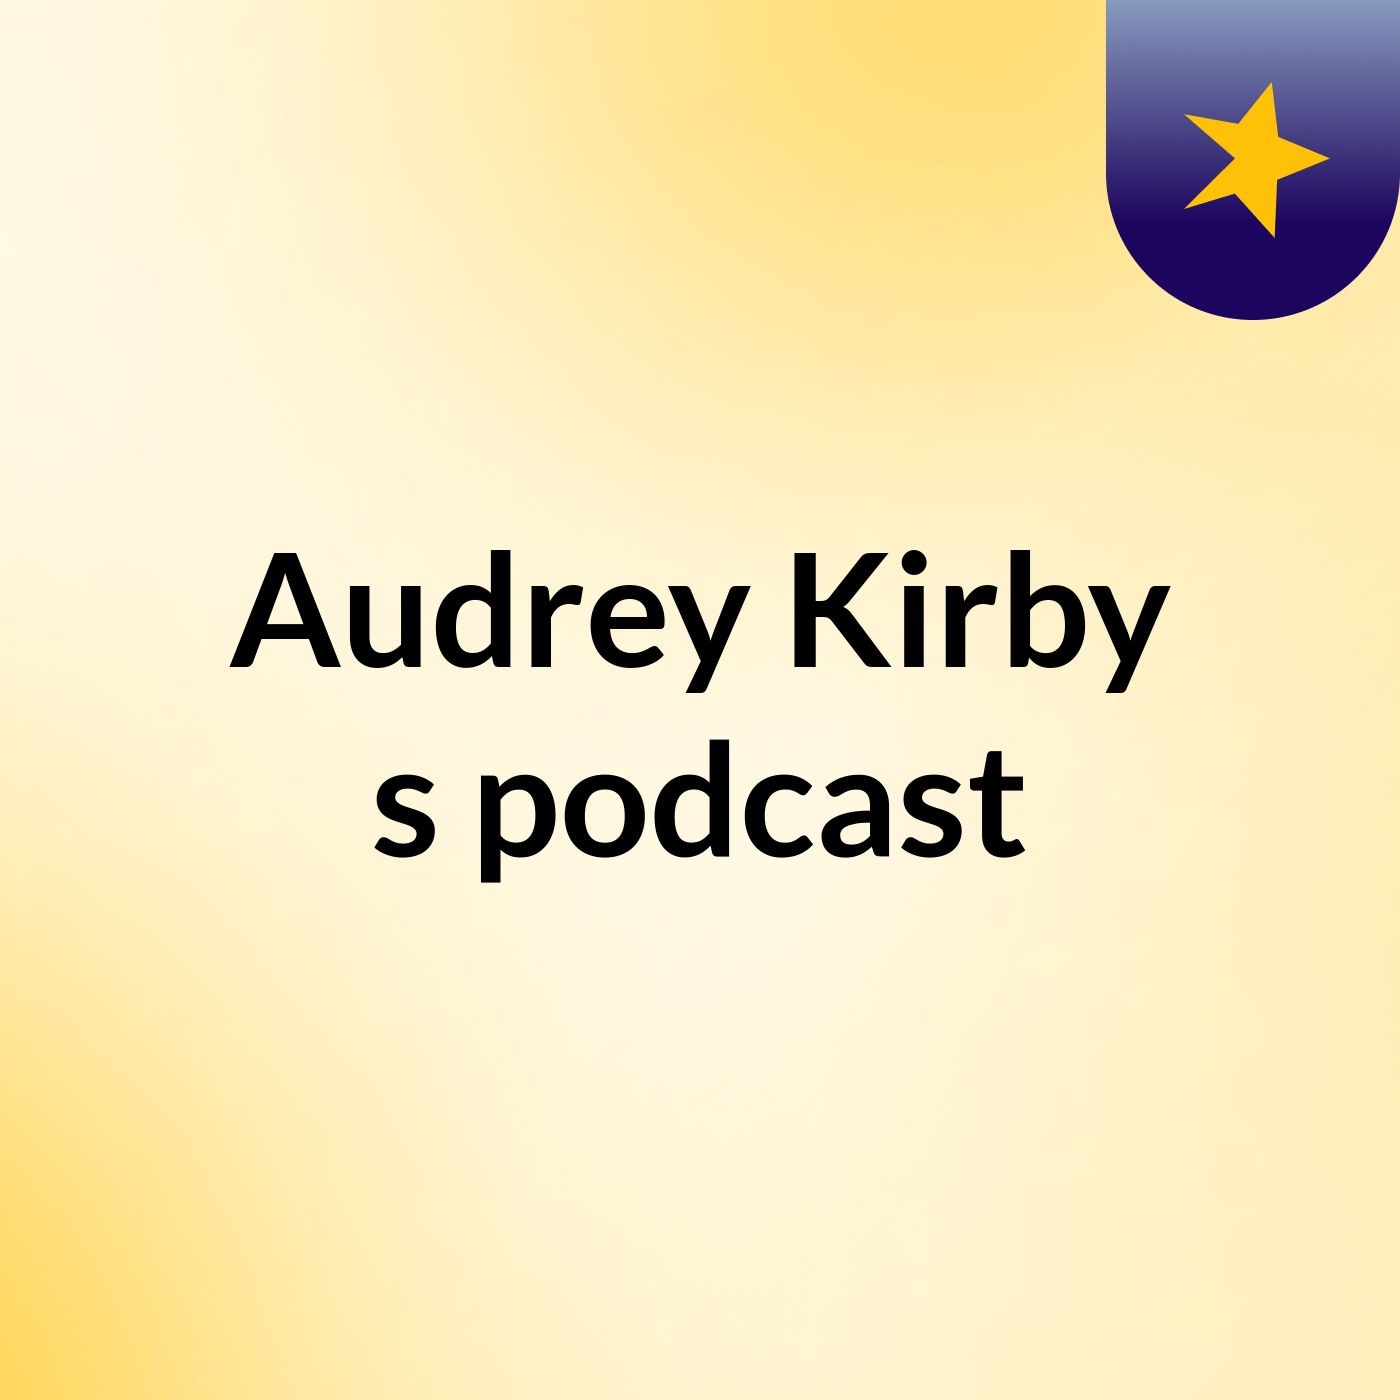 Audrey Kirby's podcast